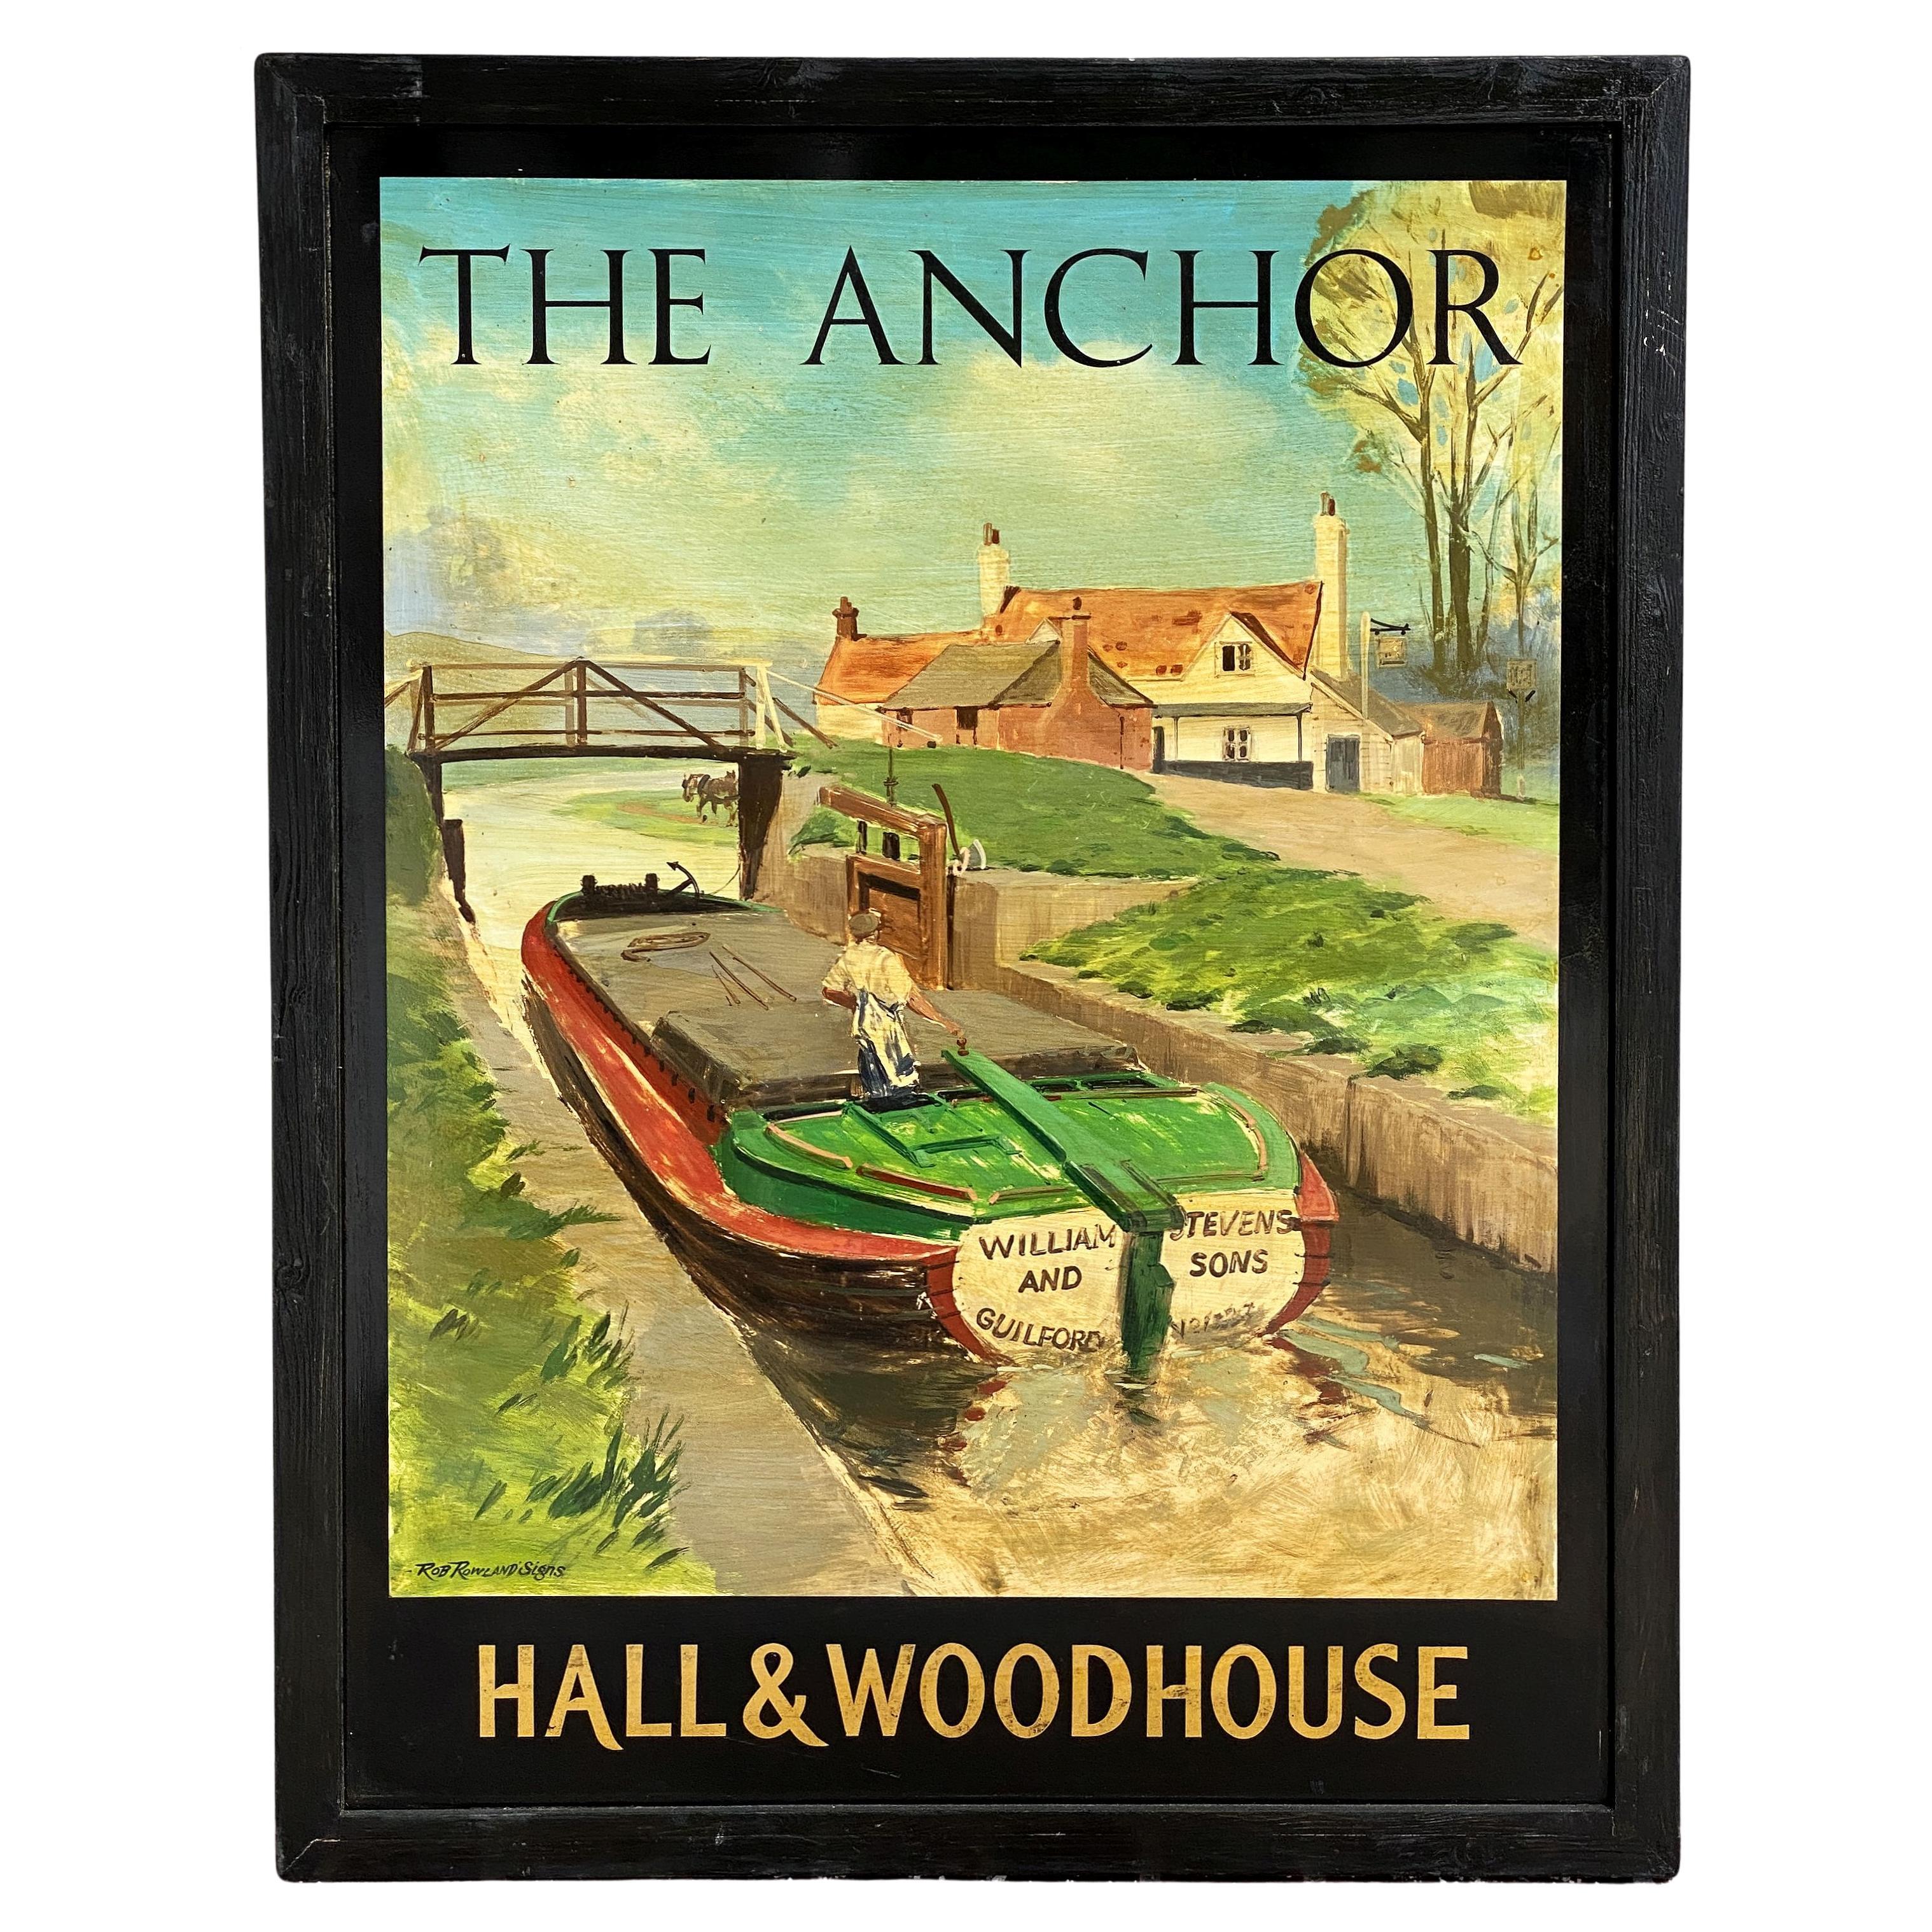 Signe de pub anglaise, « The Anchor - Hall and Woodhouse »